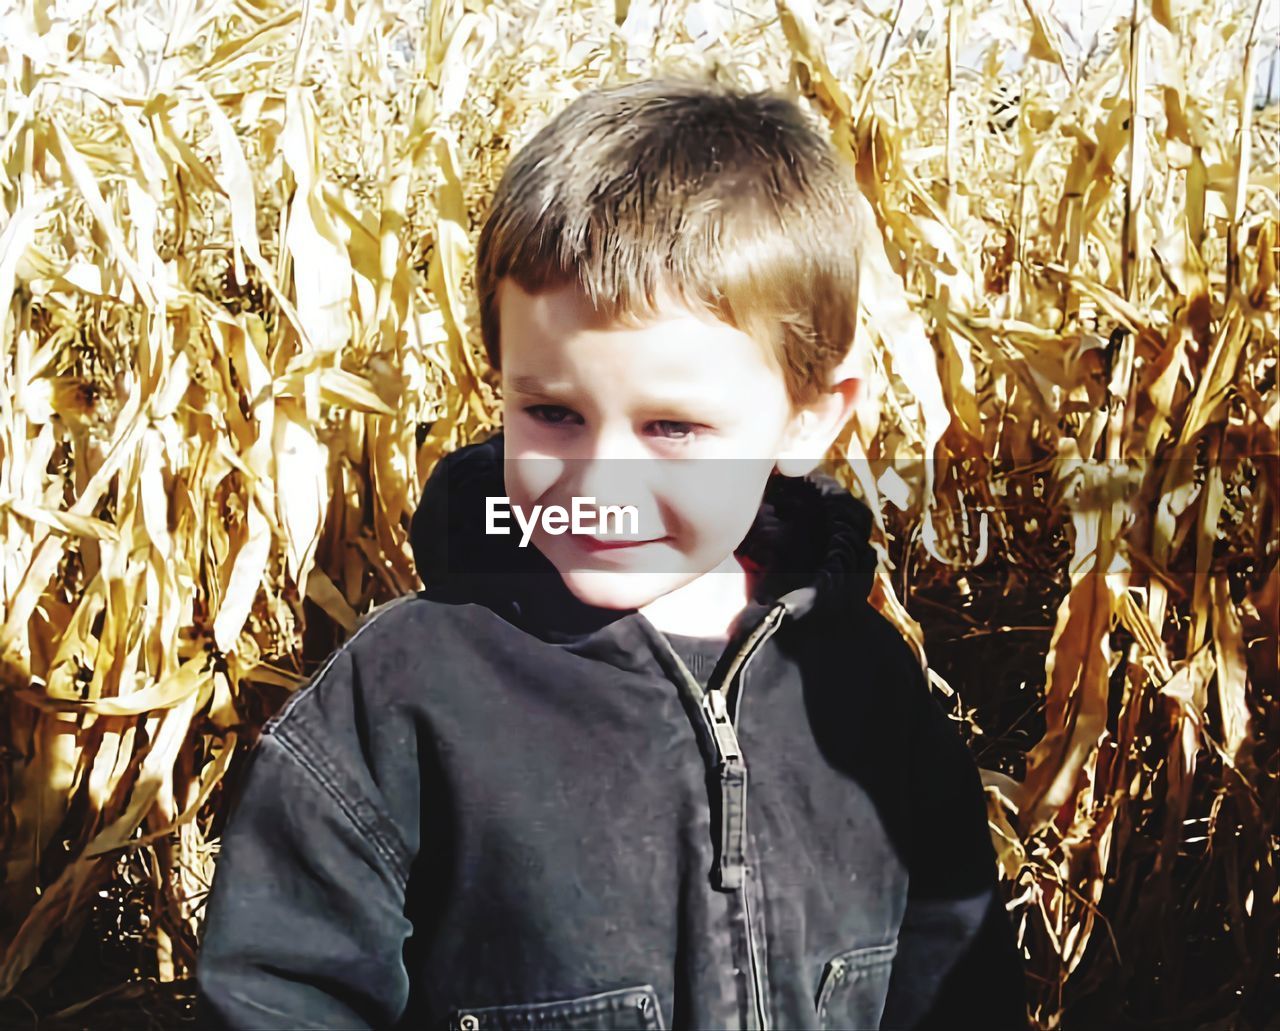 childhood, child, one person, men, portrait, field, nature, plant, land, front view, smiling, sunlight, day, casual clothing, leisure activity, standing, outdoors, waist up, looking at camera, autumn, spring, innocence, lifestyles, growth, corn, happiness, cereal plant, blond hair, emotion, crop, rural scene, headshot, agriculture, food, looking, cute, jacket